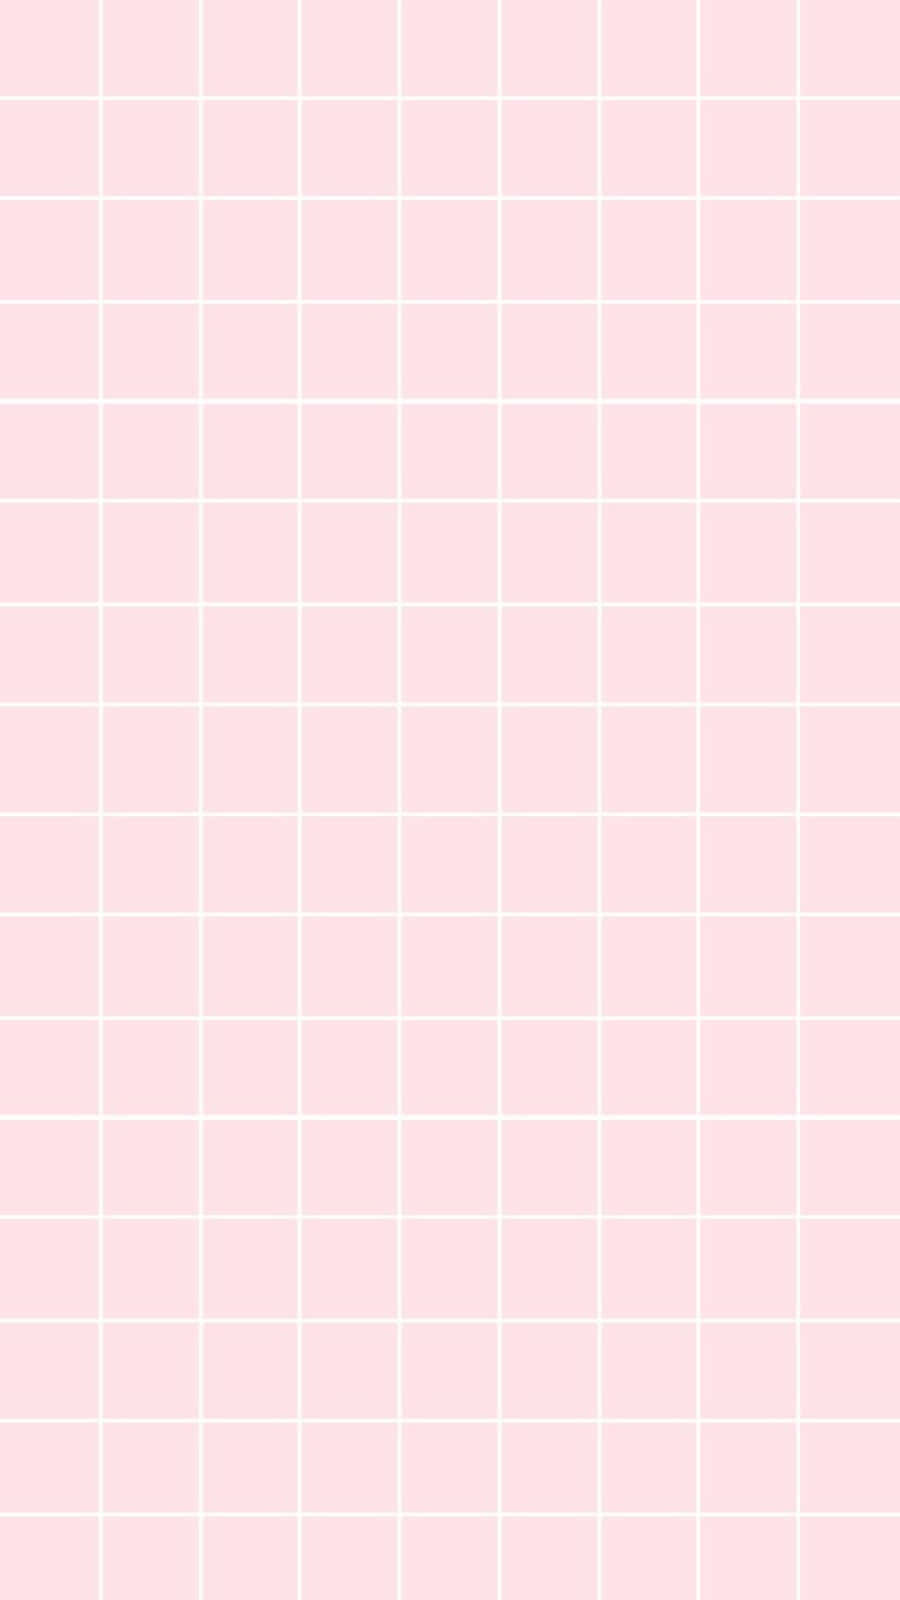 A Pink Grid Wallpaper With White Squares Wallpaper